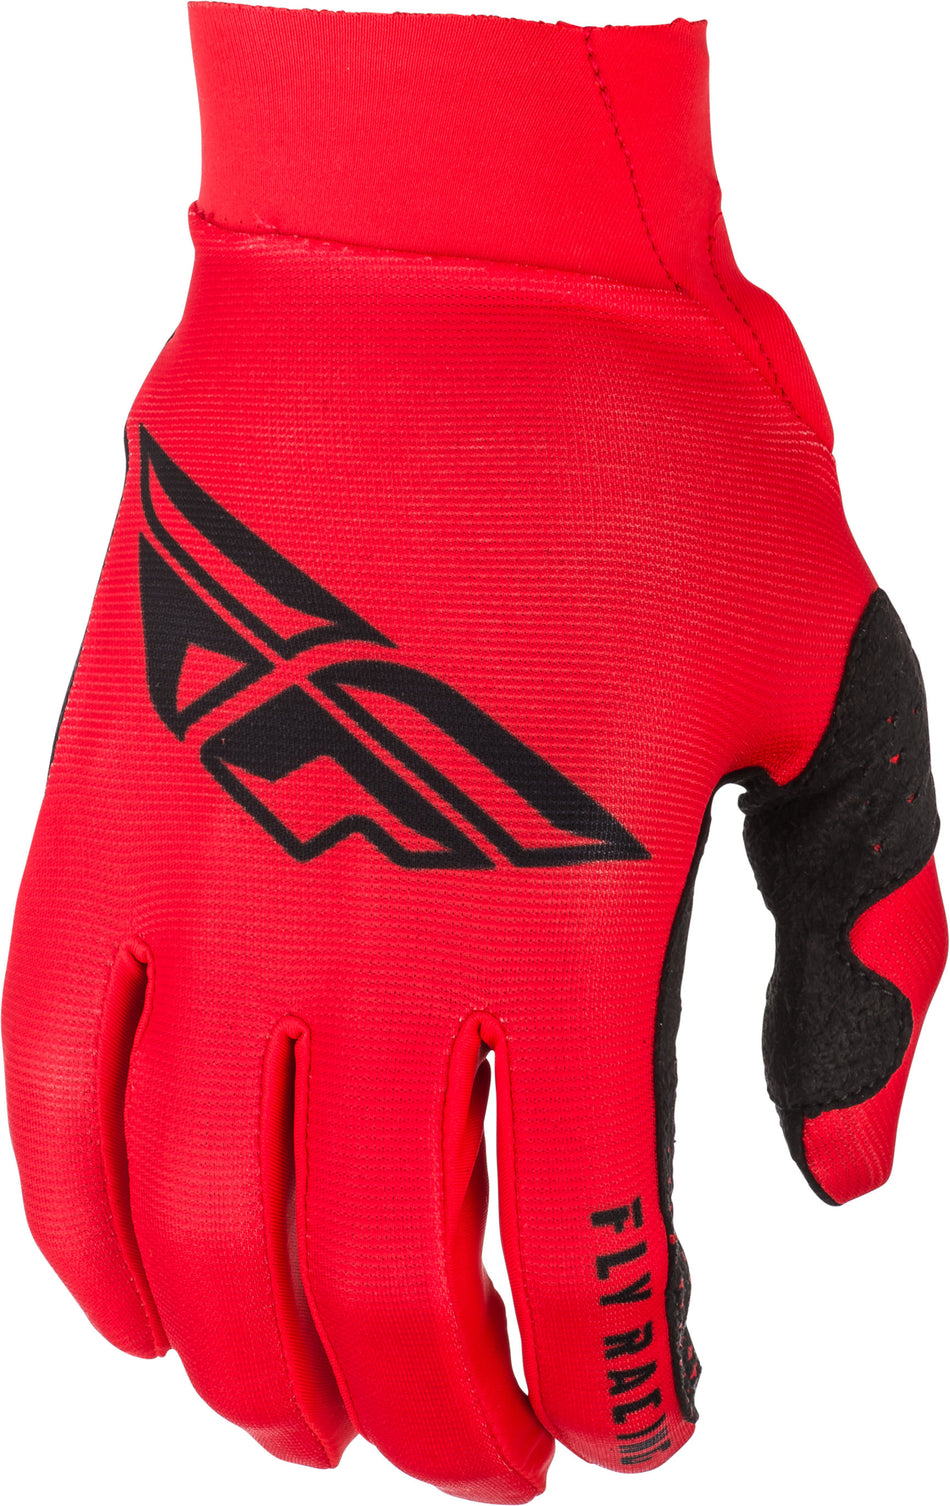 FLY RACING Pro Lite Gloves Red/Black Sz 10 372-81210